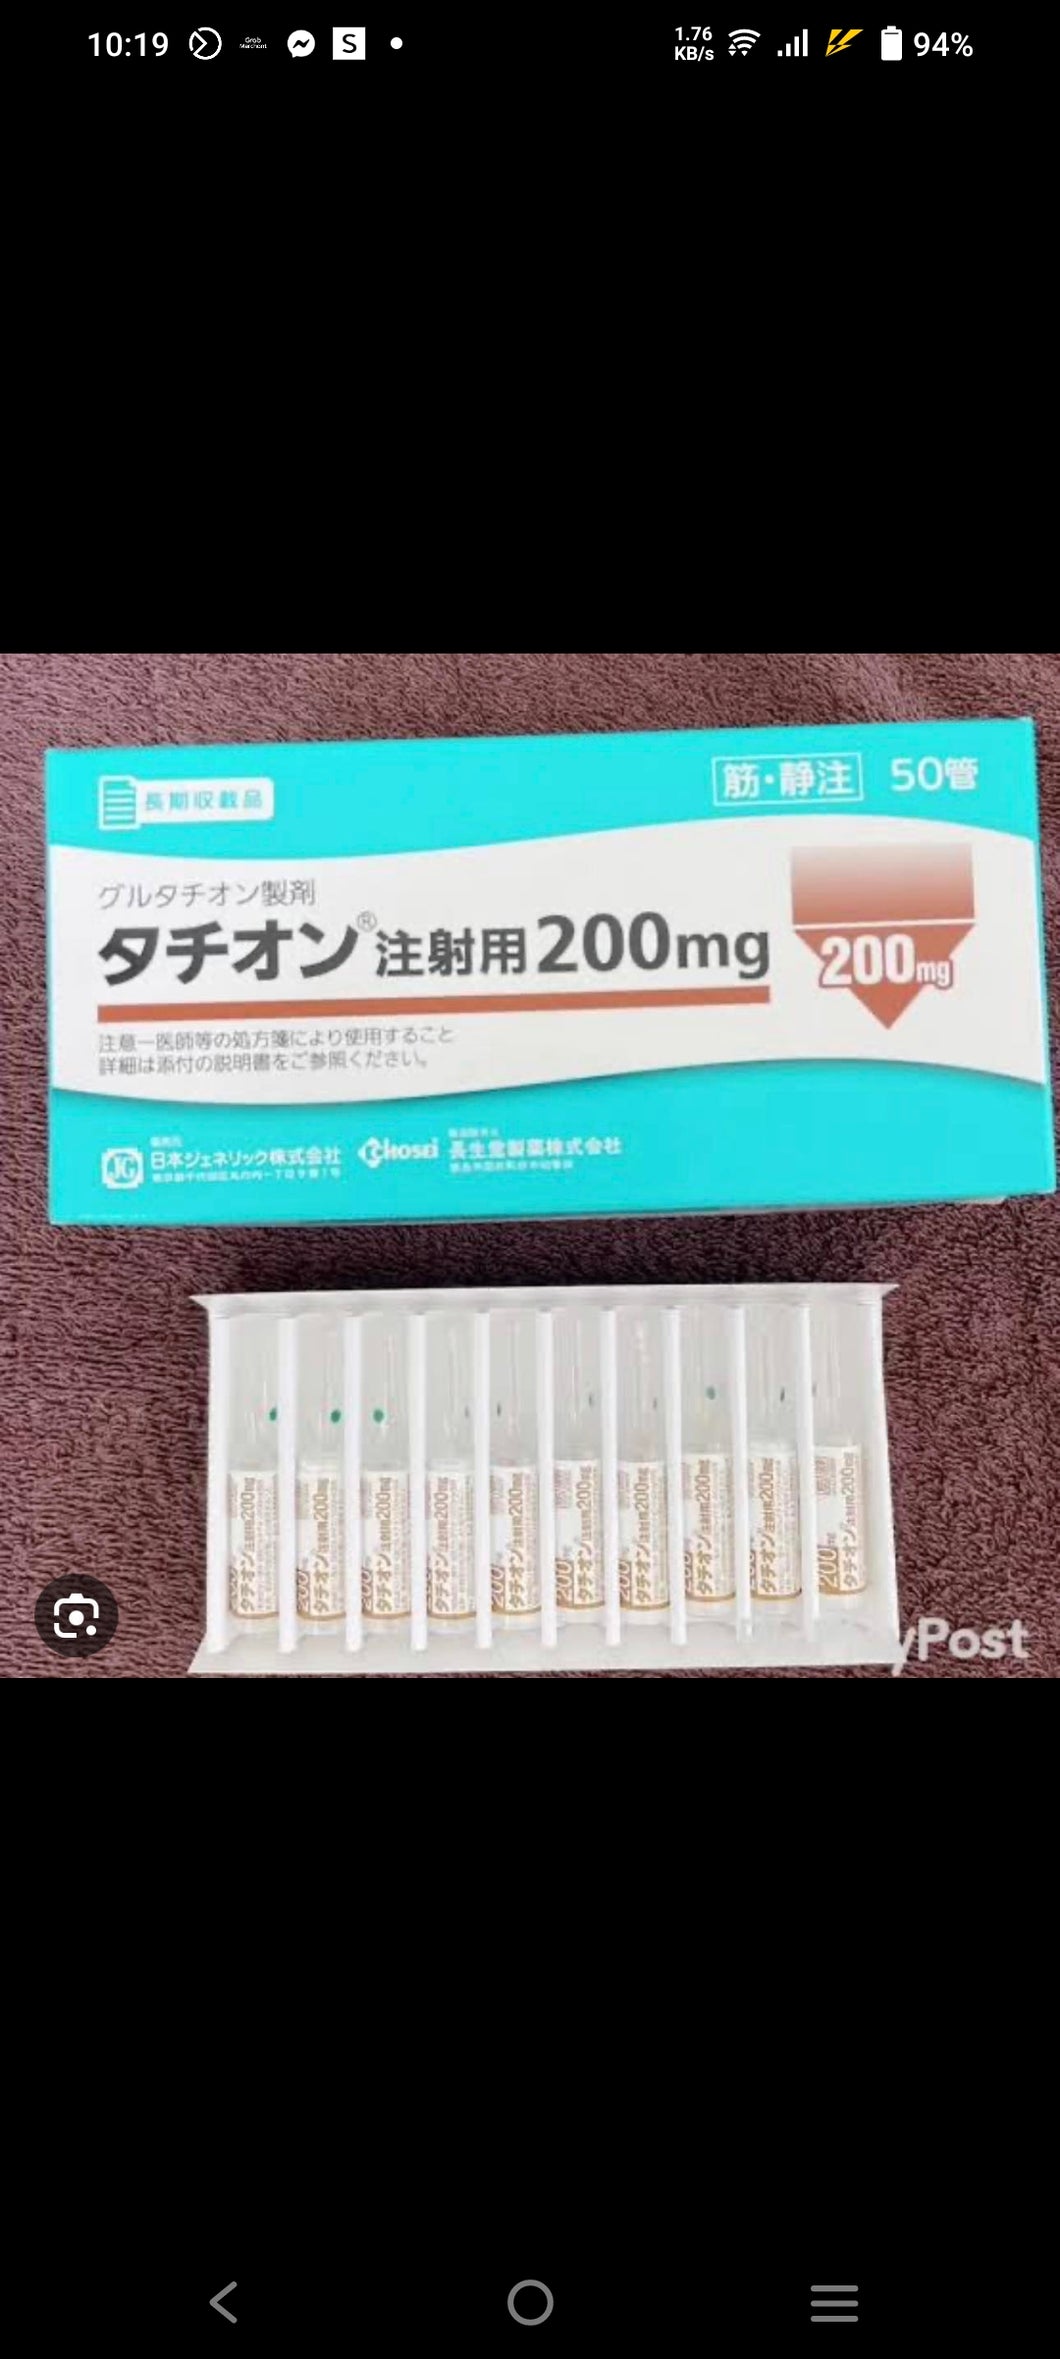 Tathione IV only from japan 50 ampoules per box